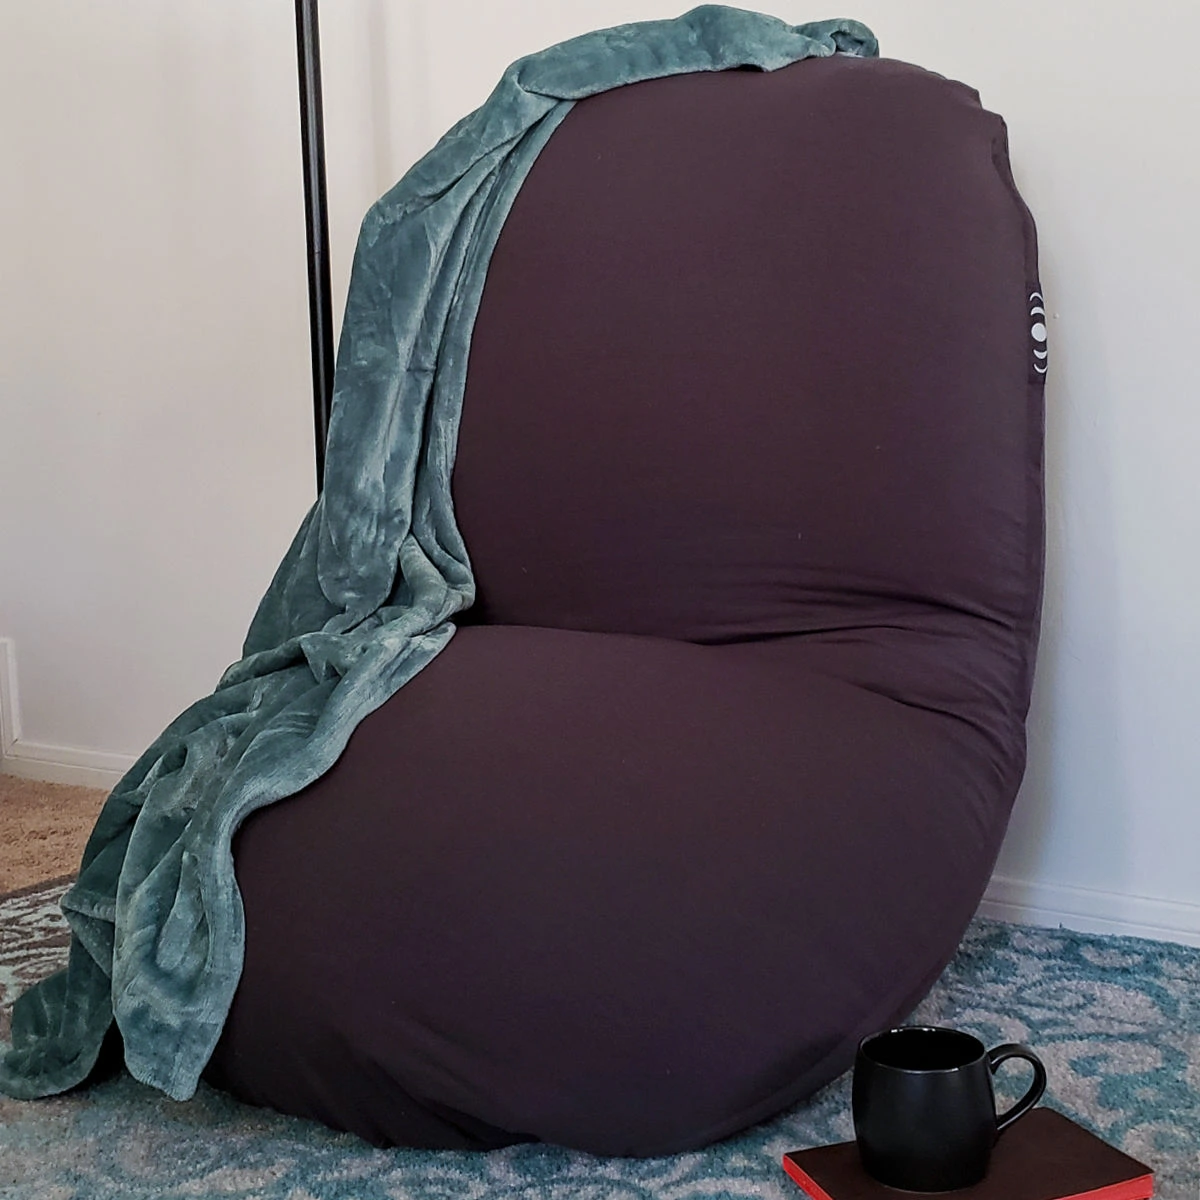 Moon Pod set up as a relaxation zone with blanket, tea and journal.